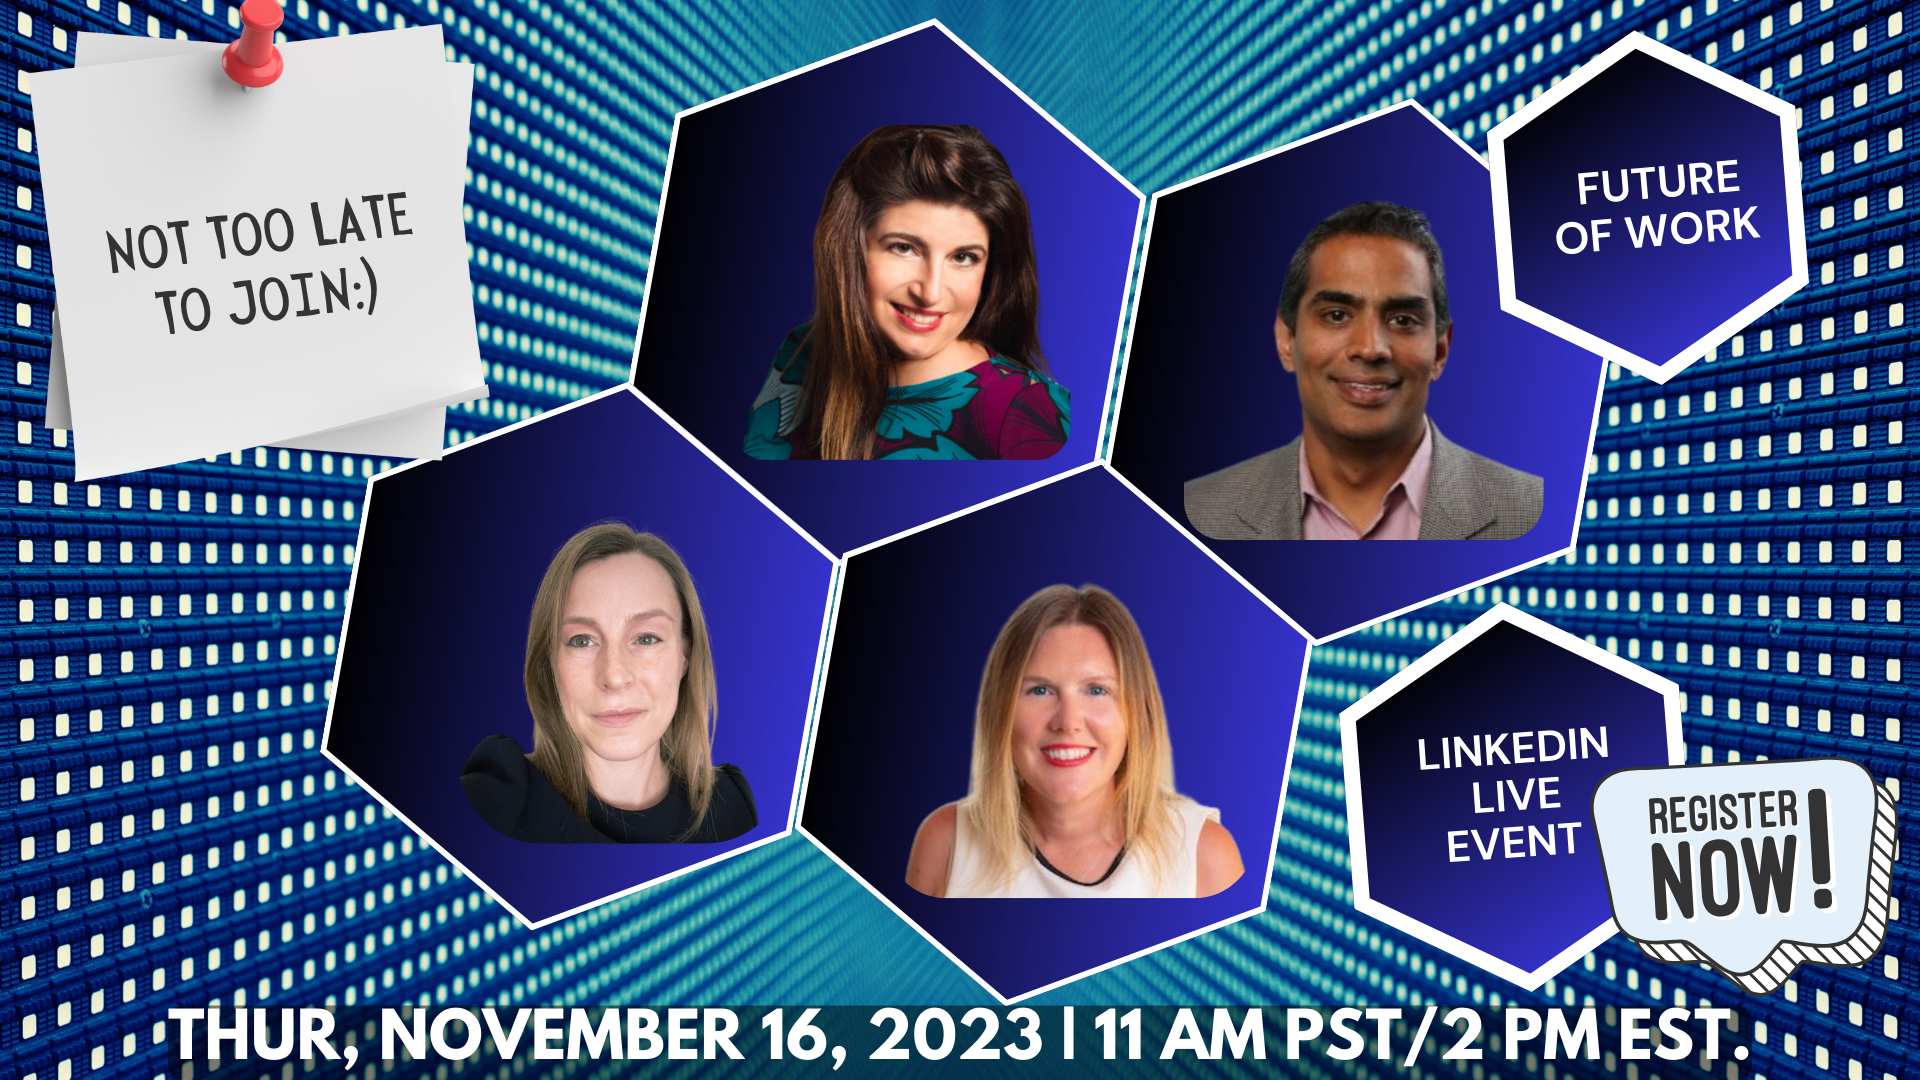 Join us for our next LI live event on Thursday, Nov 16 at 11 am PST